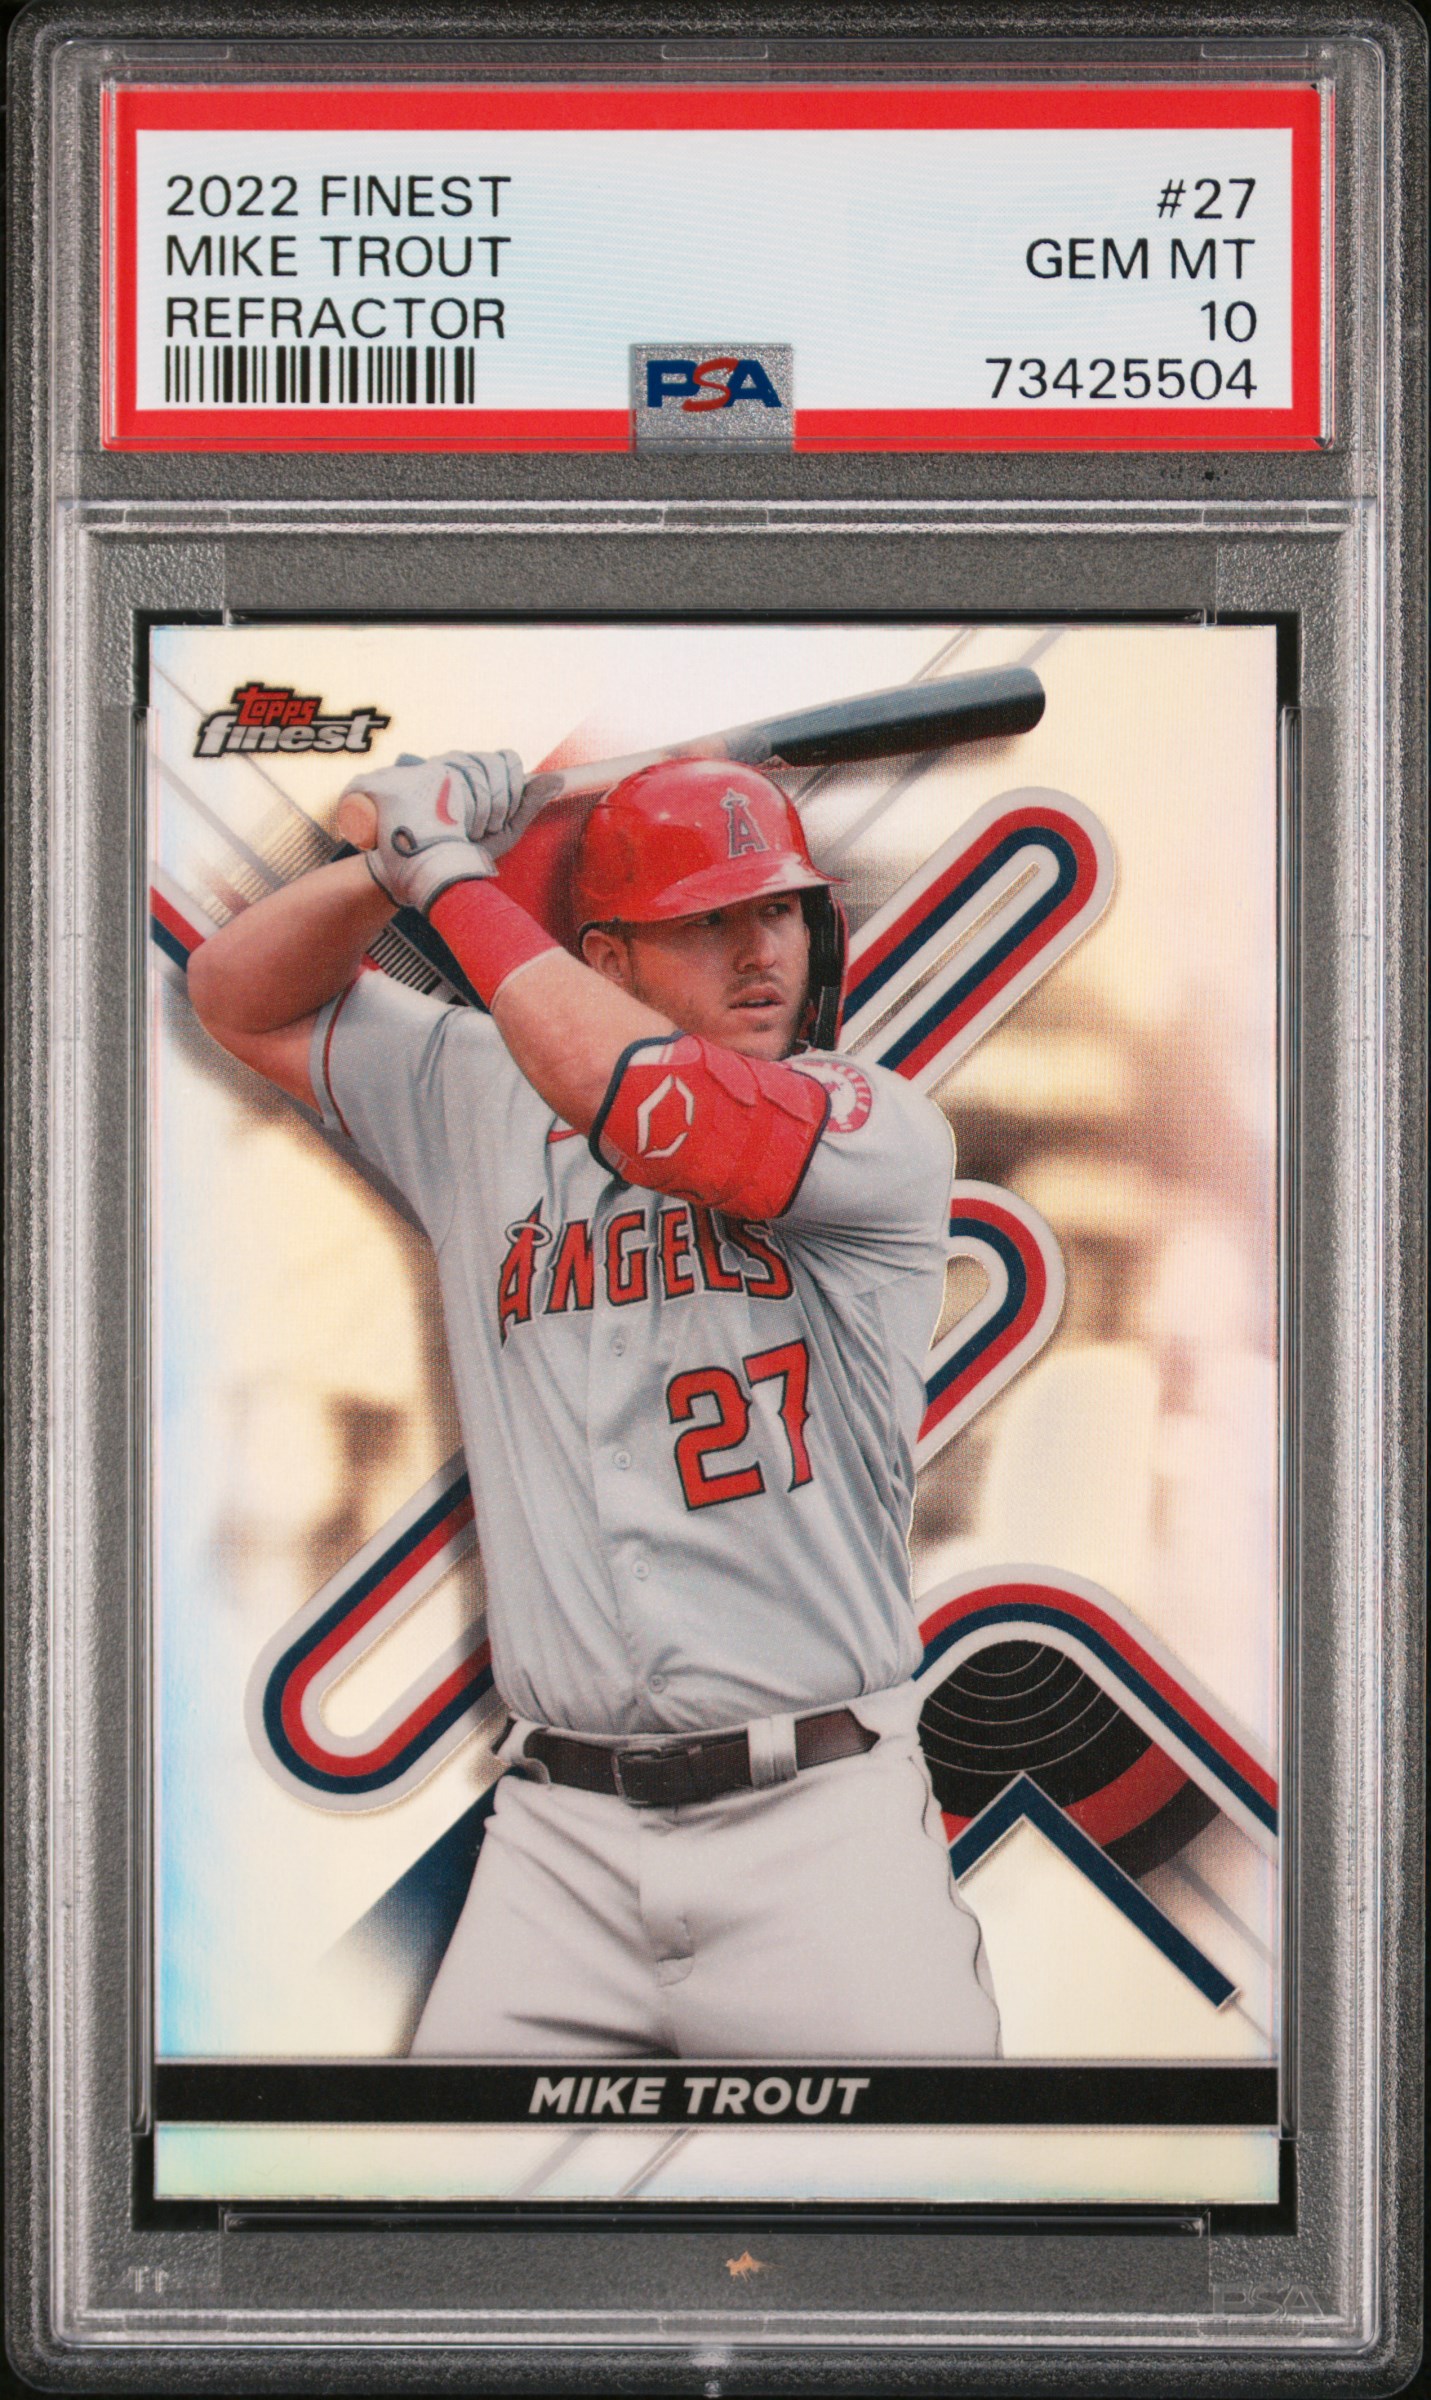 2022 Topps Finest Refractor #27 Mike Trout - PSA GEM MT 10